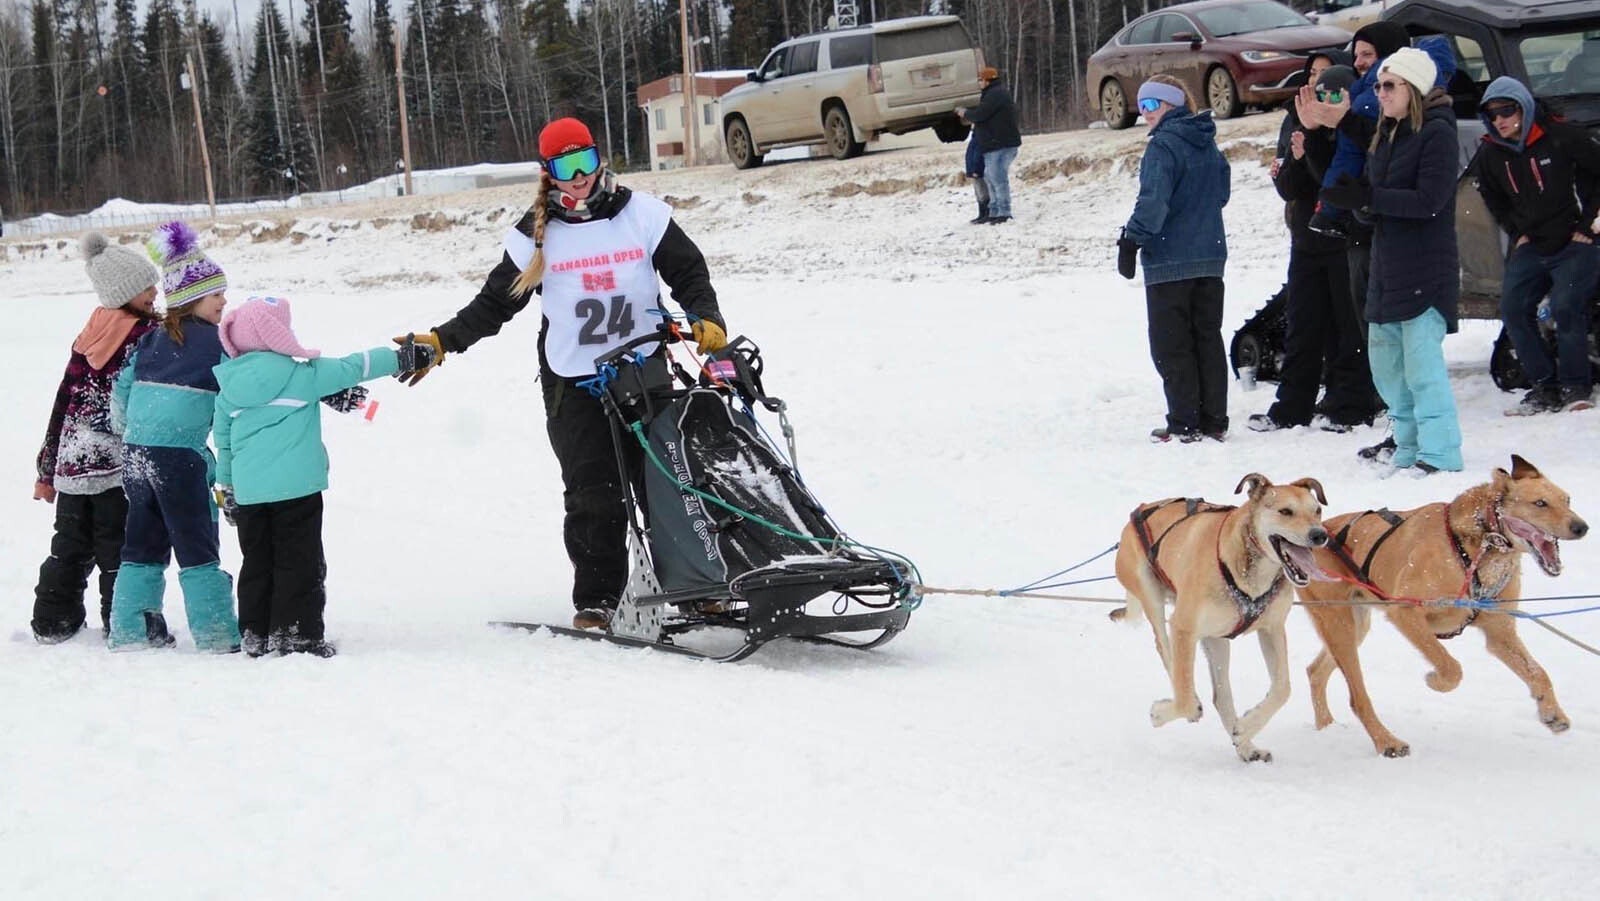 Jess Moore runs the Canadian Open in Fort Nelson, British Columbia, last April. Now the Jackson rookie will run in one of the most prestigious sled dog races in North America.